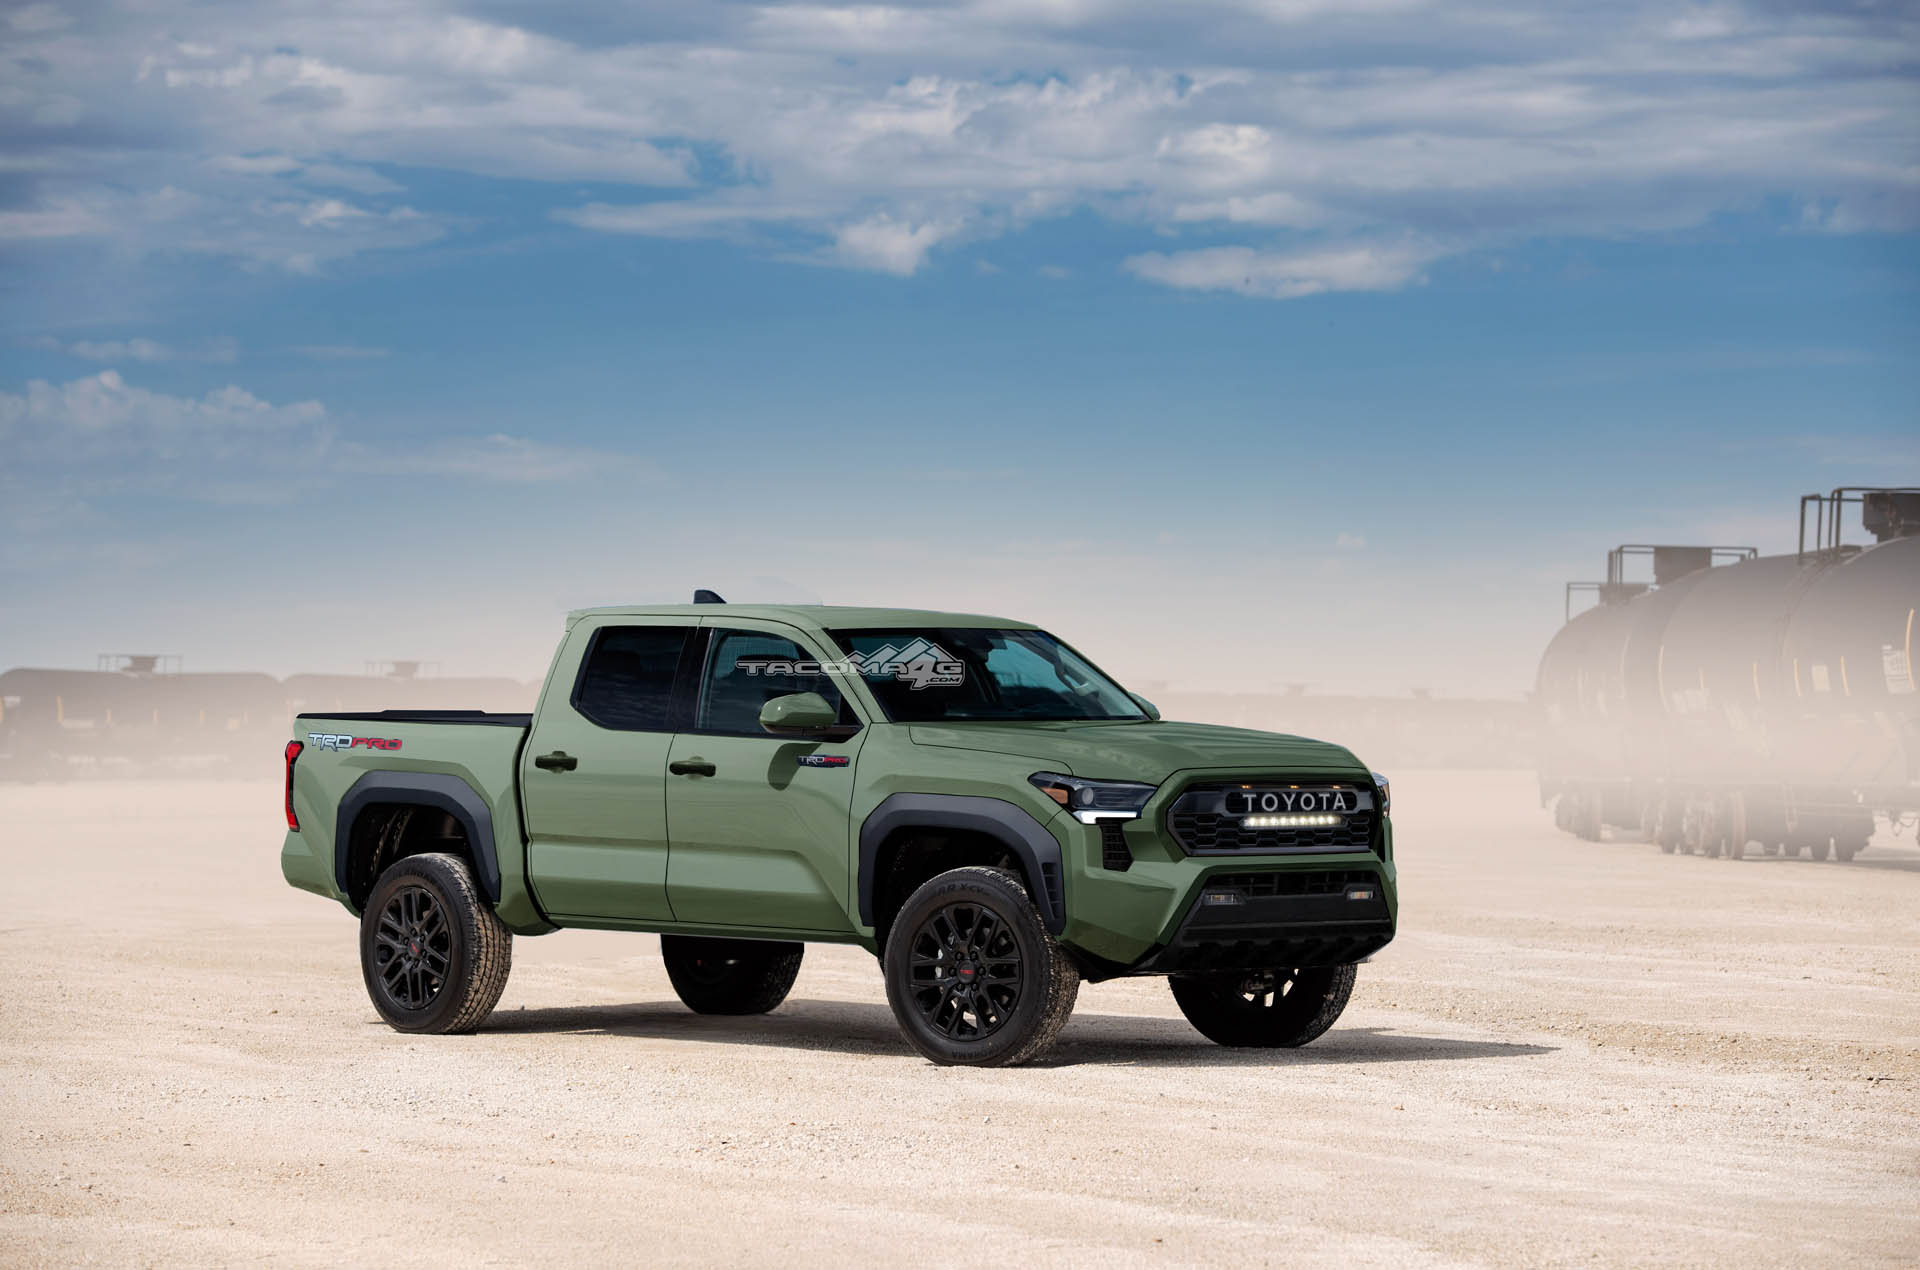 2024 Tacoma Our 2024 Toyota Tacoma TRD PRO Preview Renderings! 2024 Tacoma TRD Pro Army Green